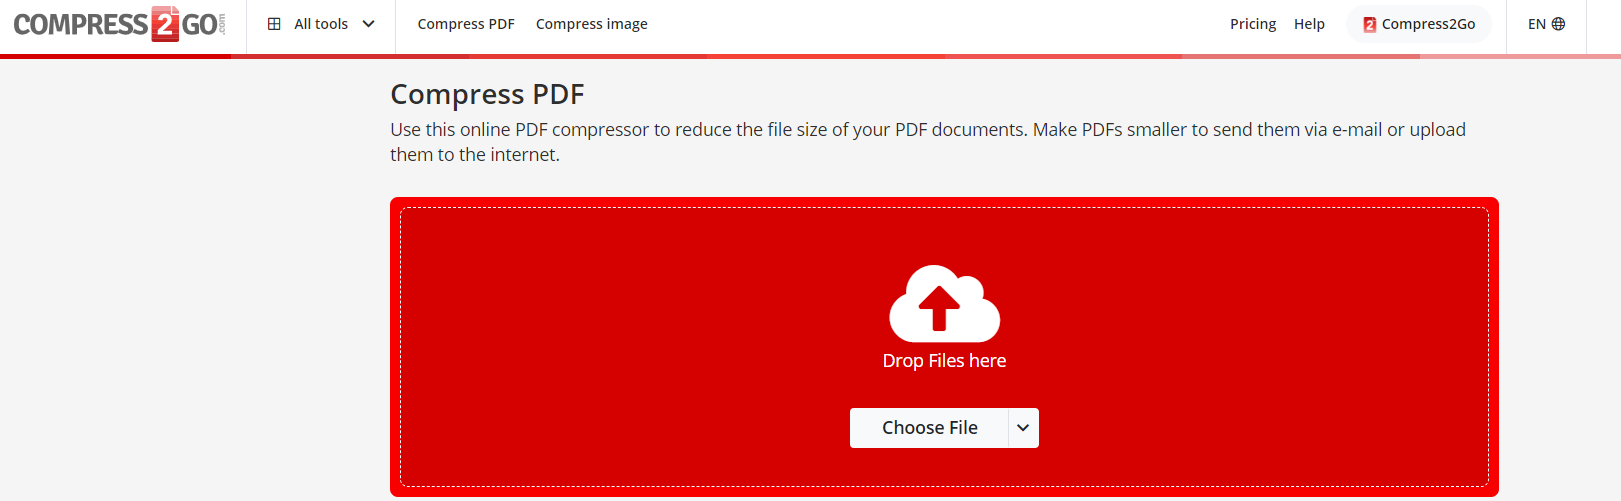 Compress PDF to 1MB with Compress2Go